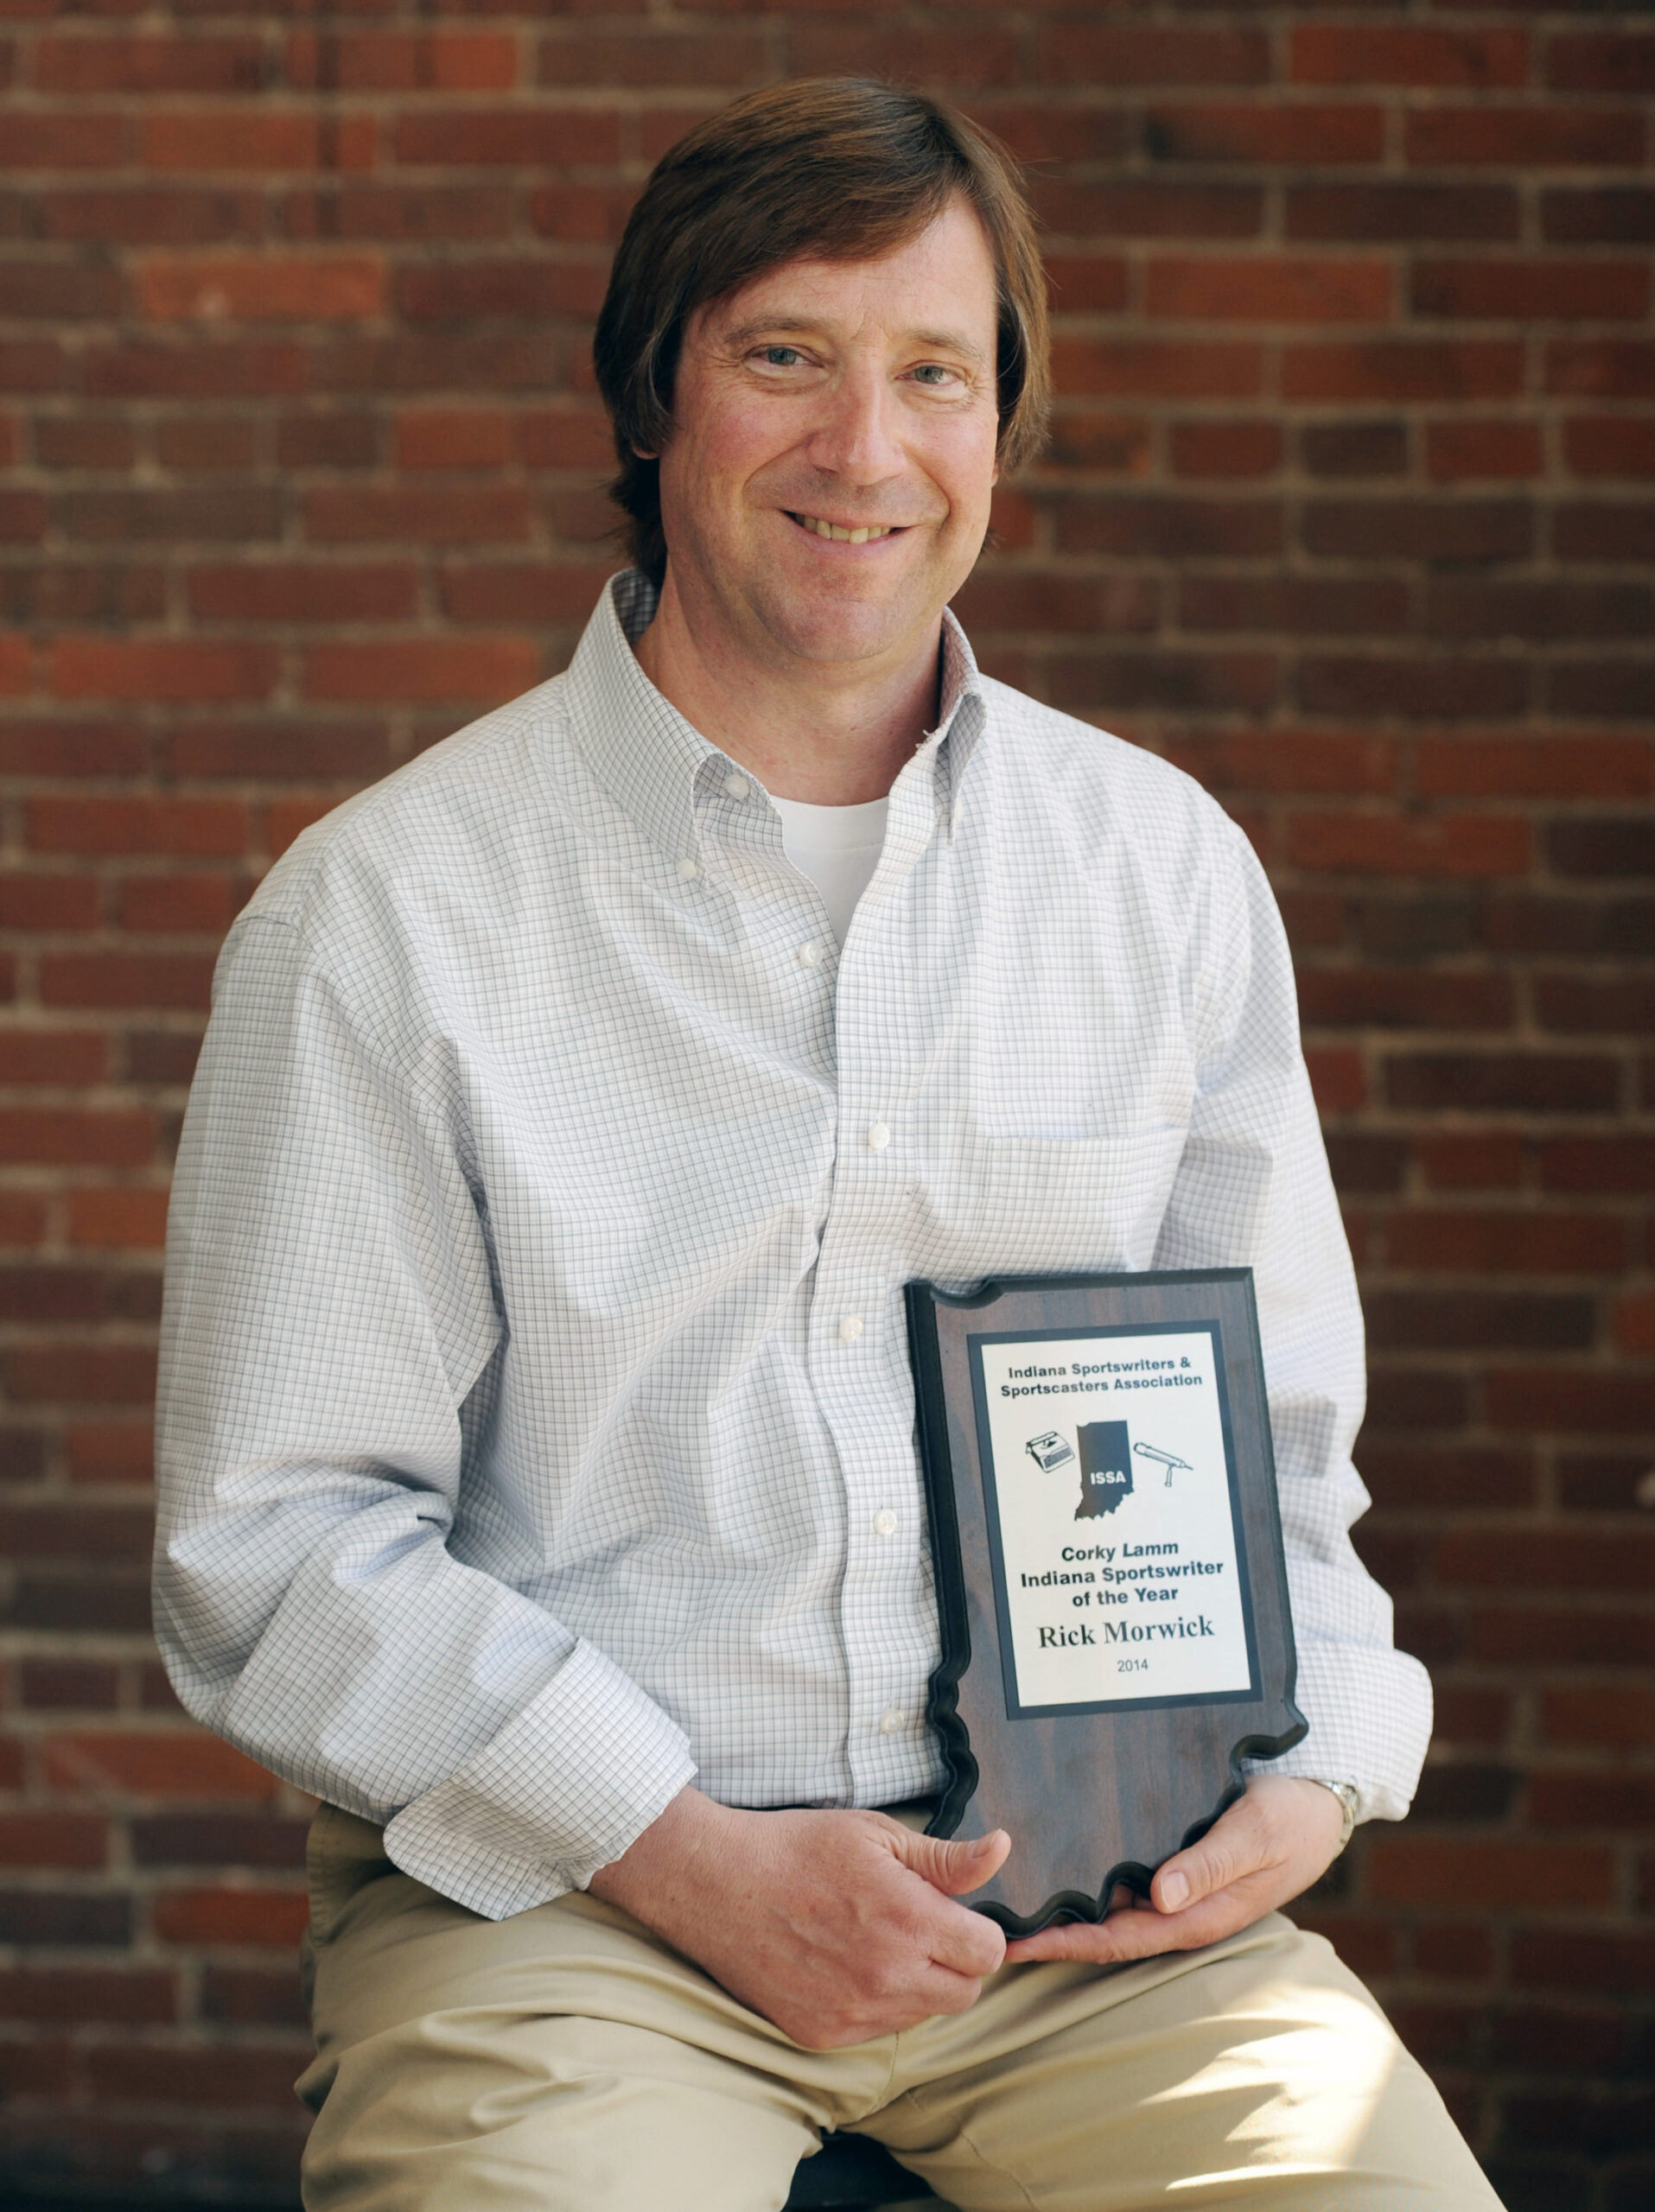 Rick Morwick was named Sportswriter of the Year.